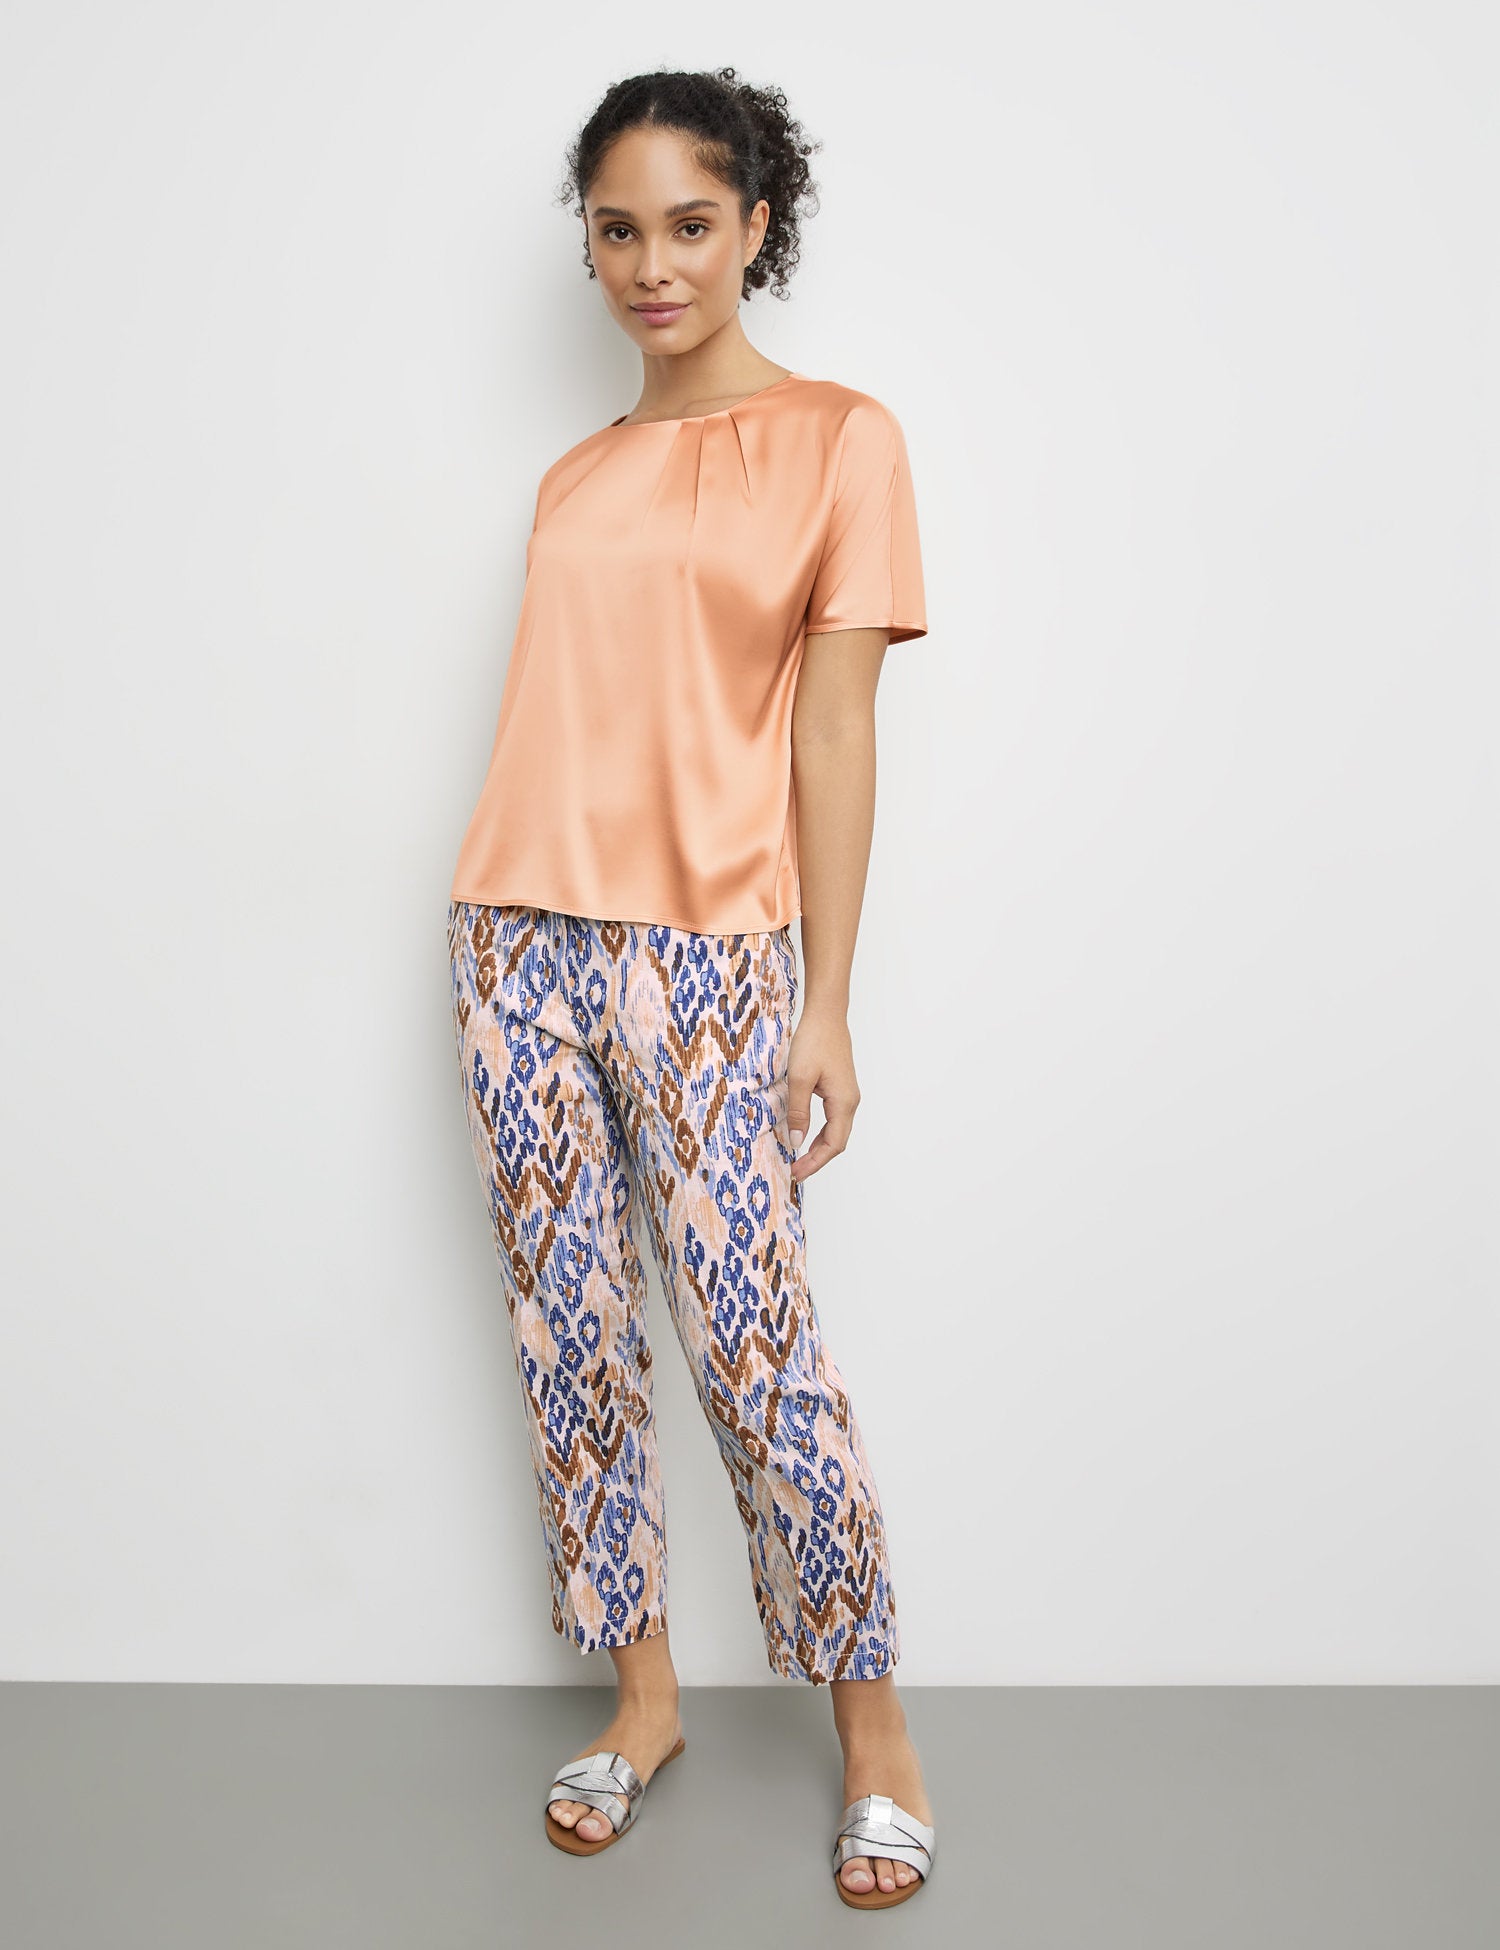 Flowing Blouse Top With Fabric Panelling_977047-35033_60315_05